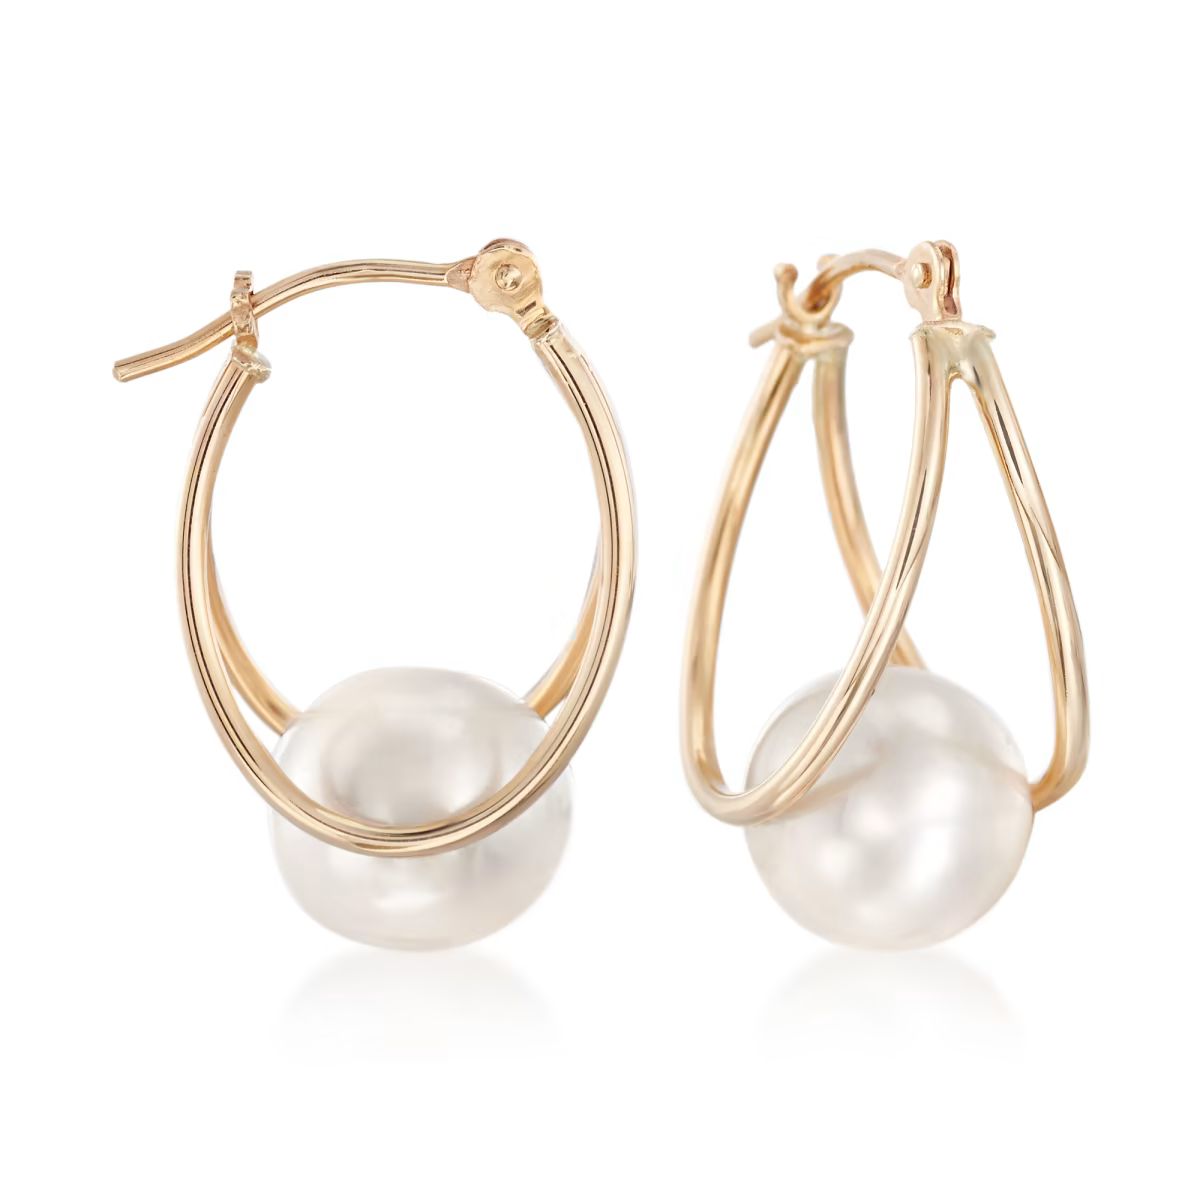 8-9mm Cultured Pearl Double-Hoop Earrings in 14kt Yellow Gold. 3/4" | Ross-Simons